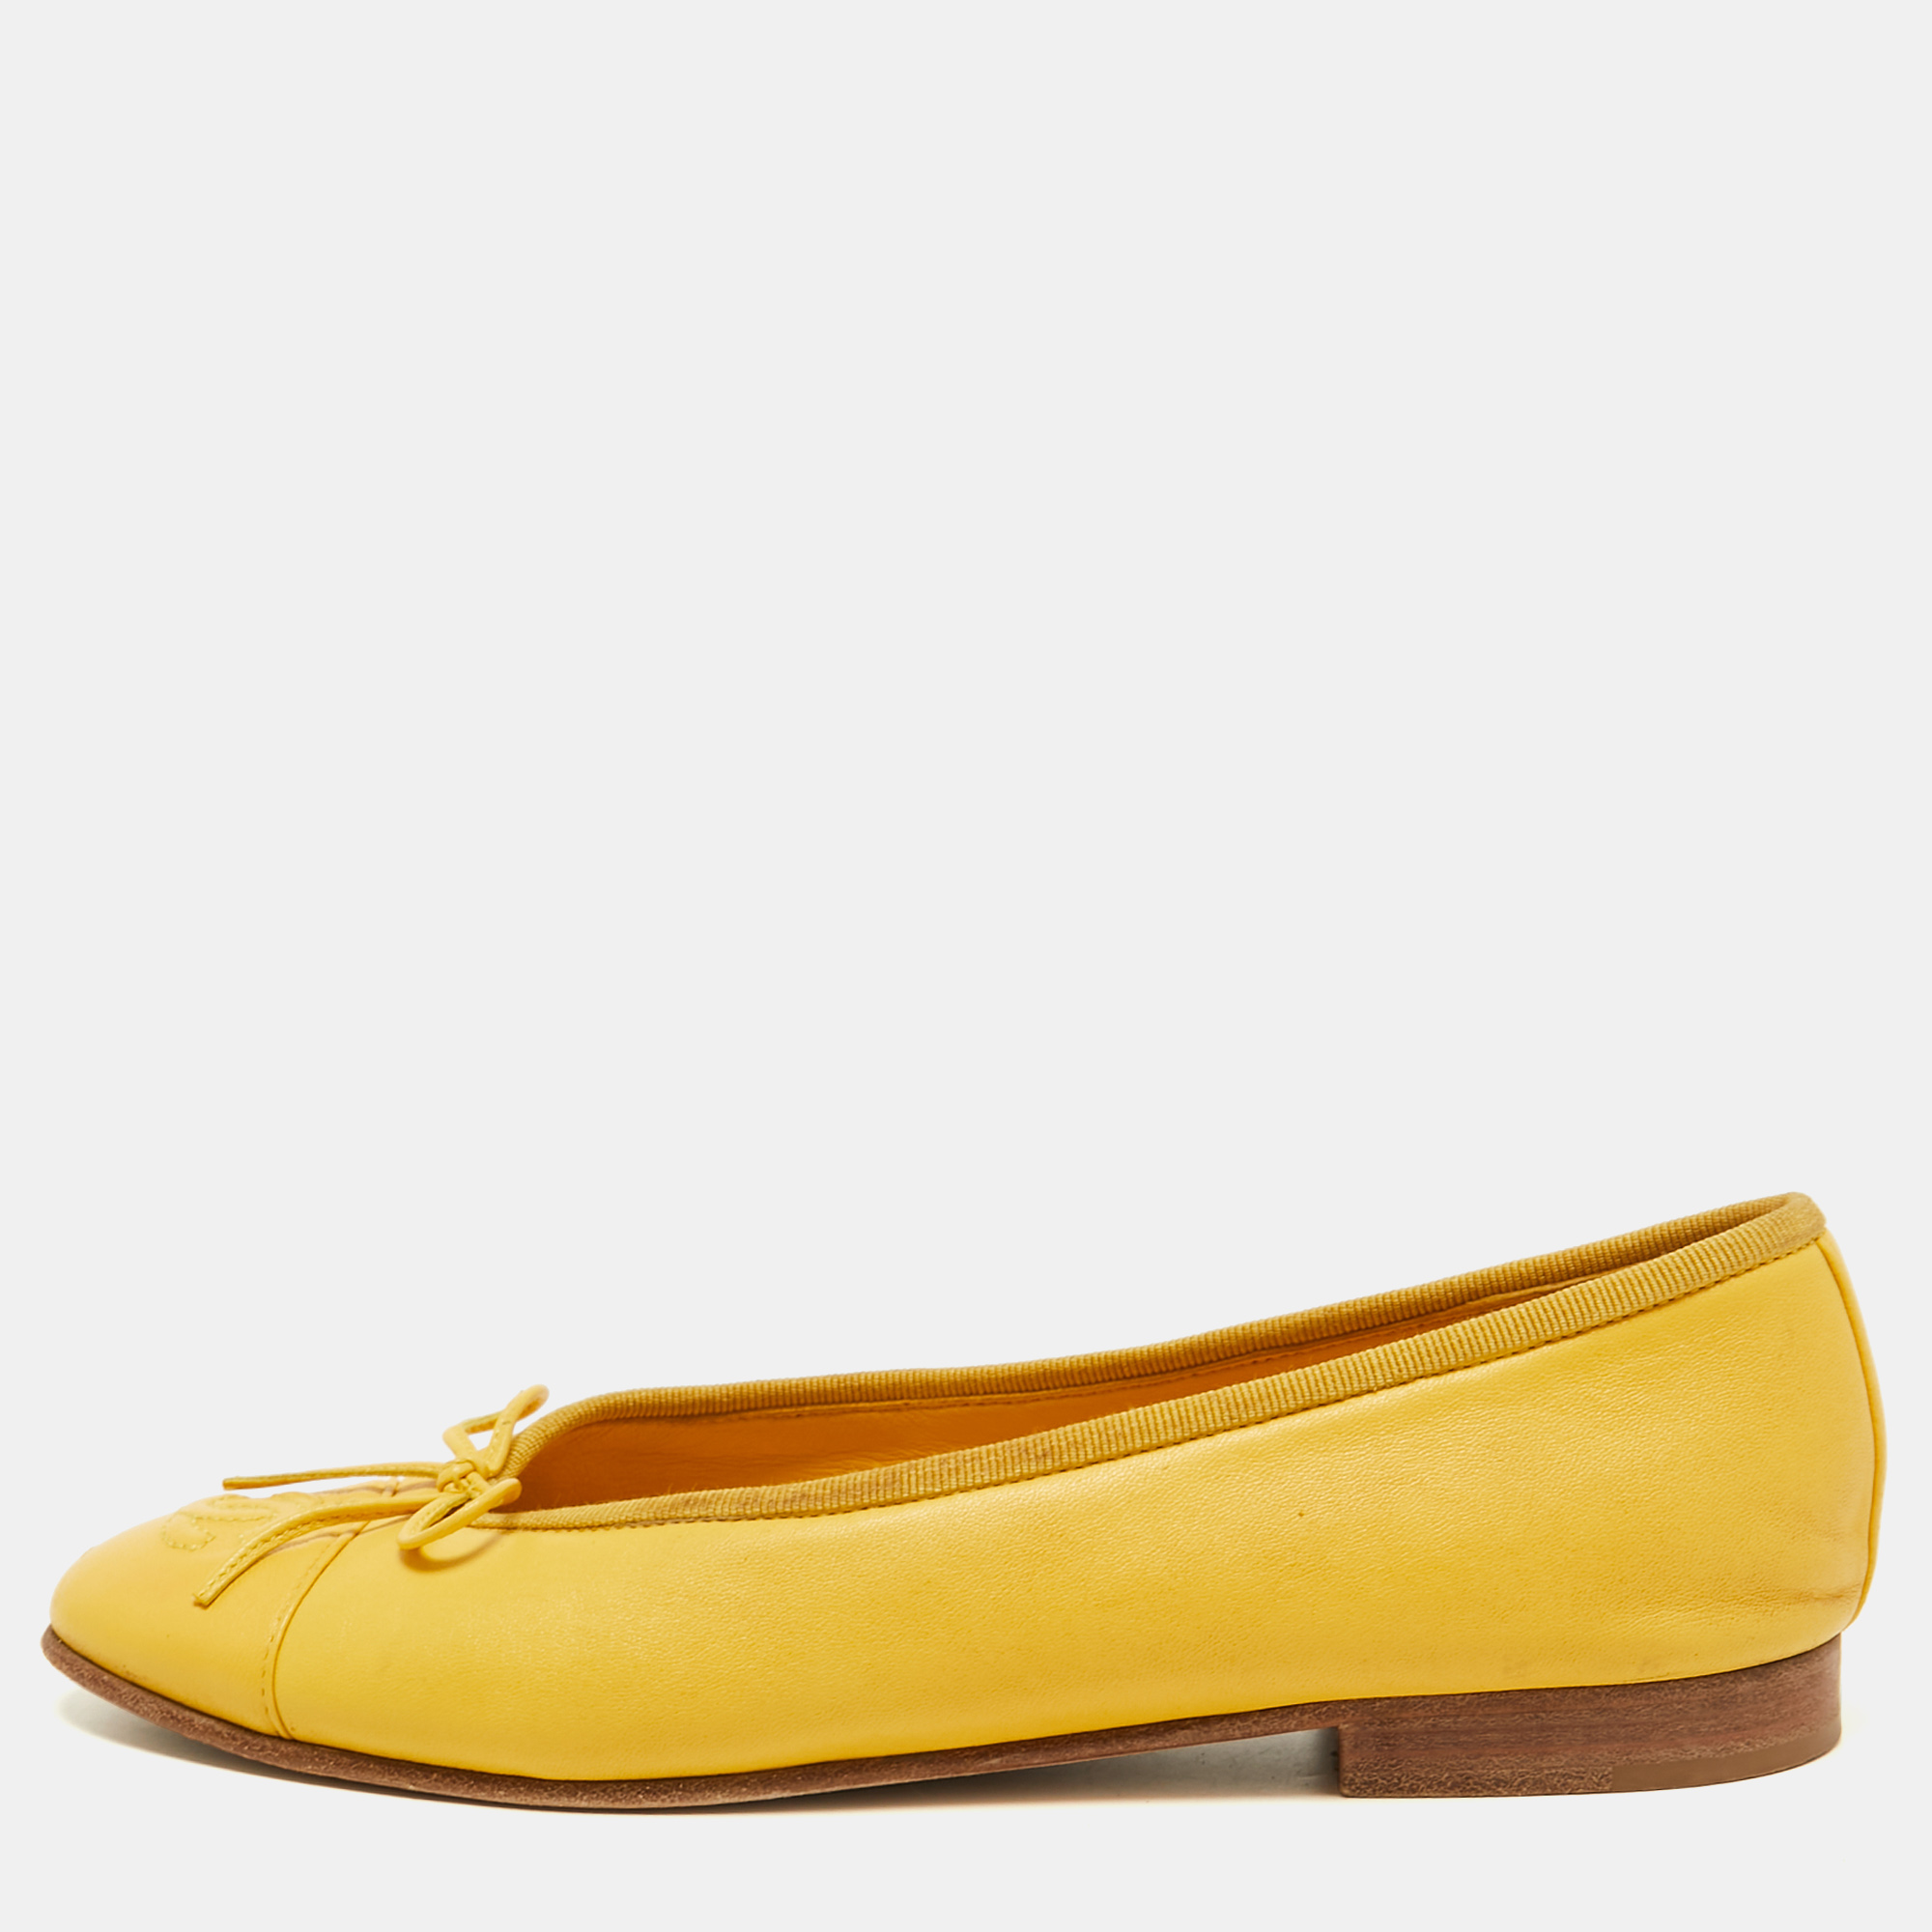 Chanel Yellow Leather CC Bow Ballet Flats Size 36.5